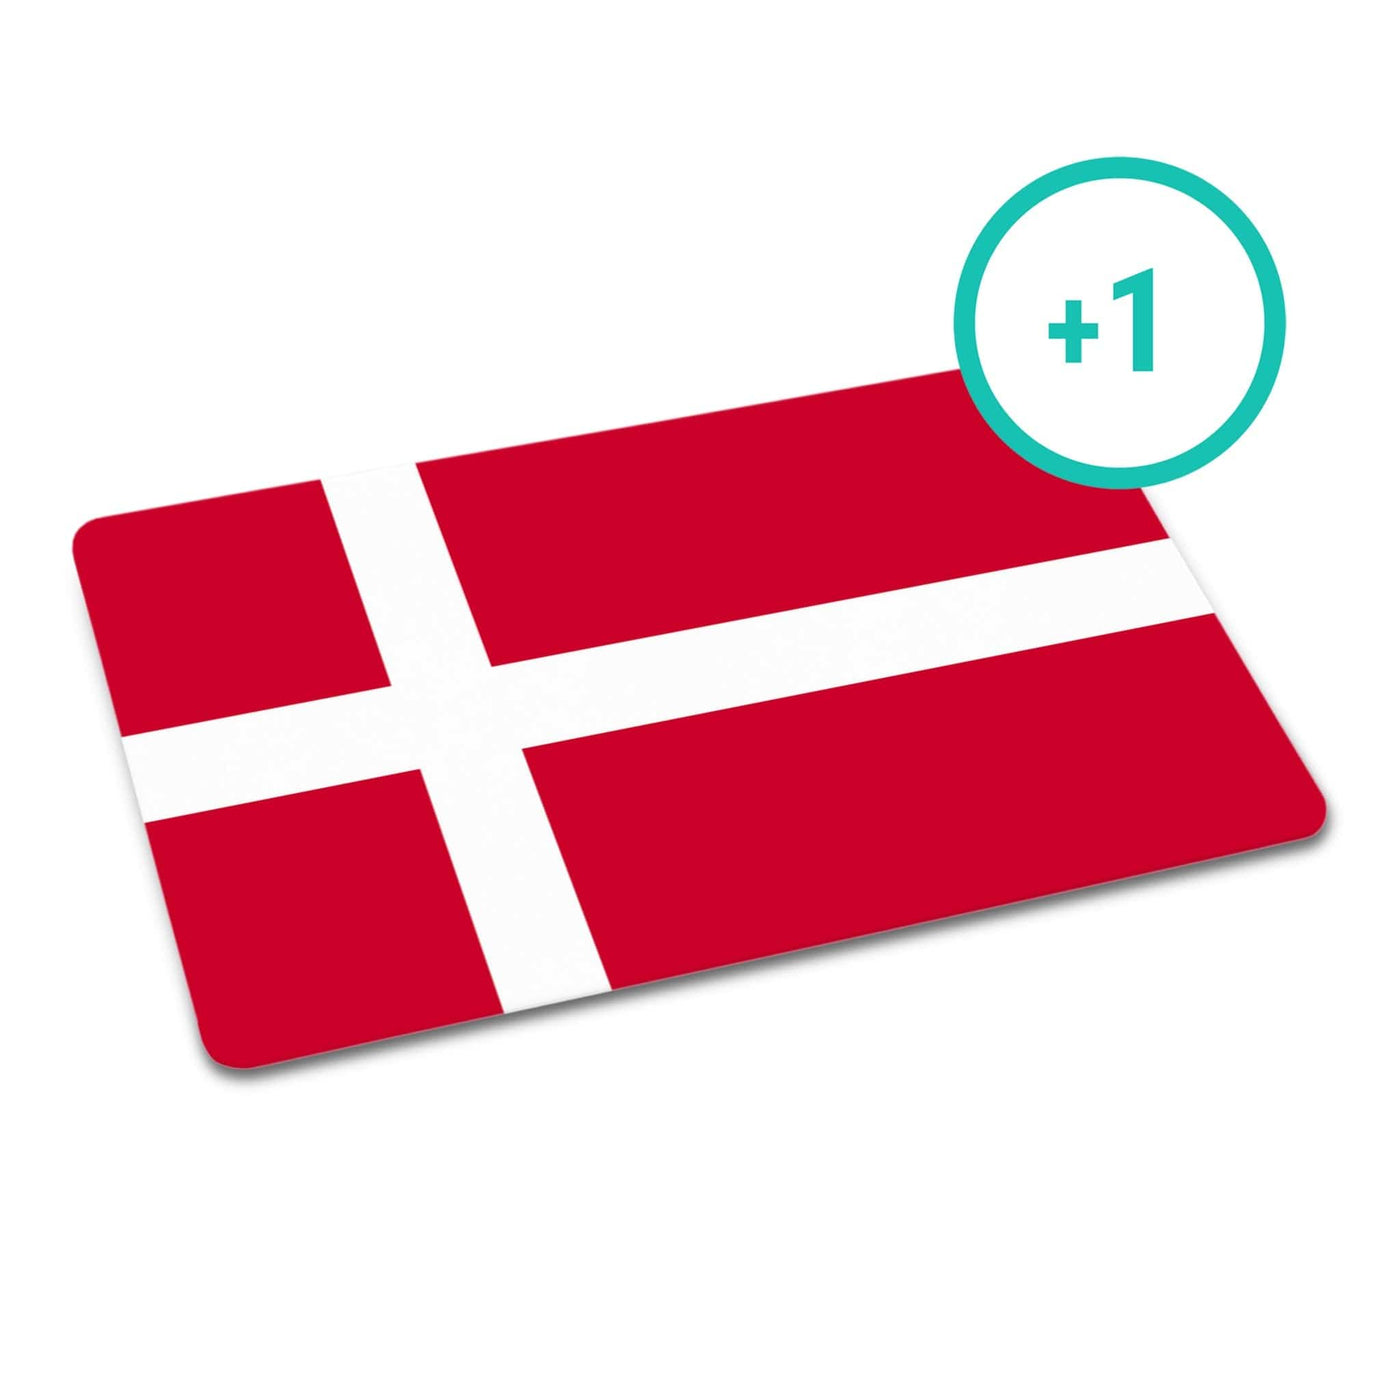 Additional Customized Card: Danish (Leave in cart to purchase)